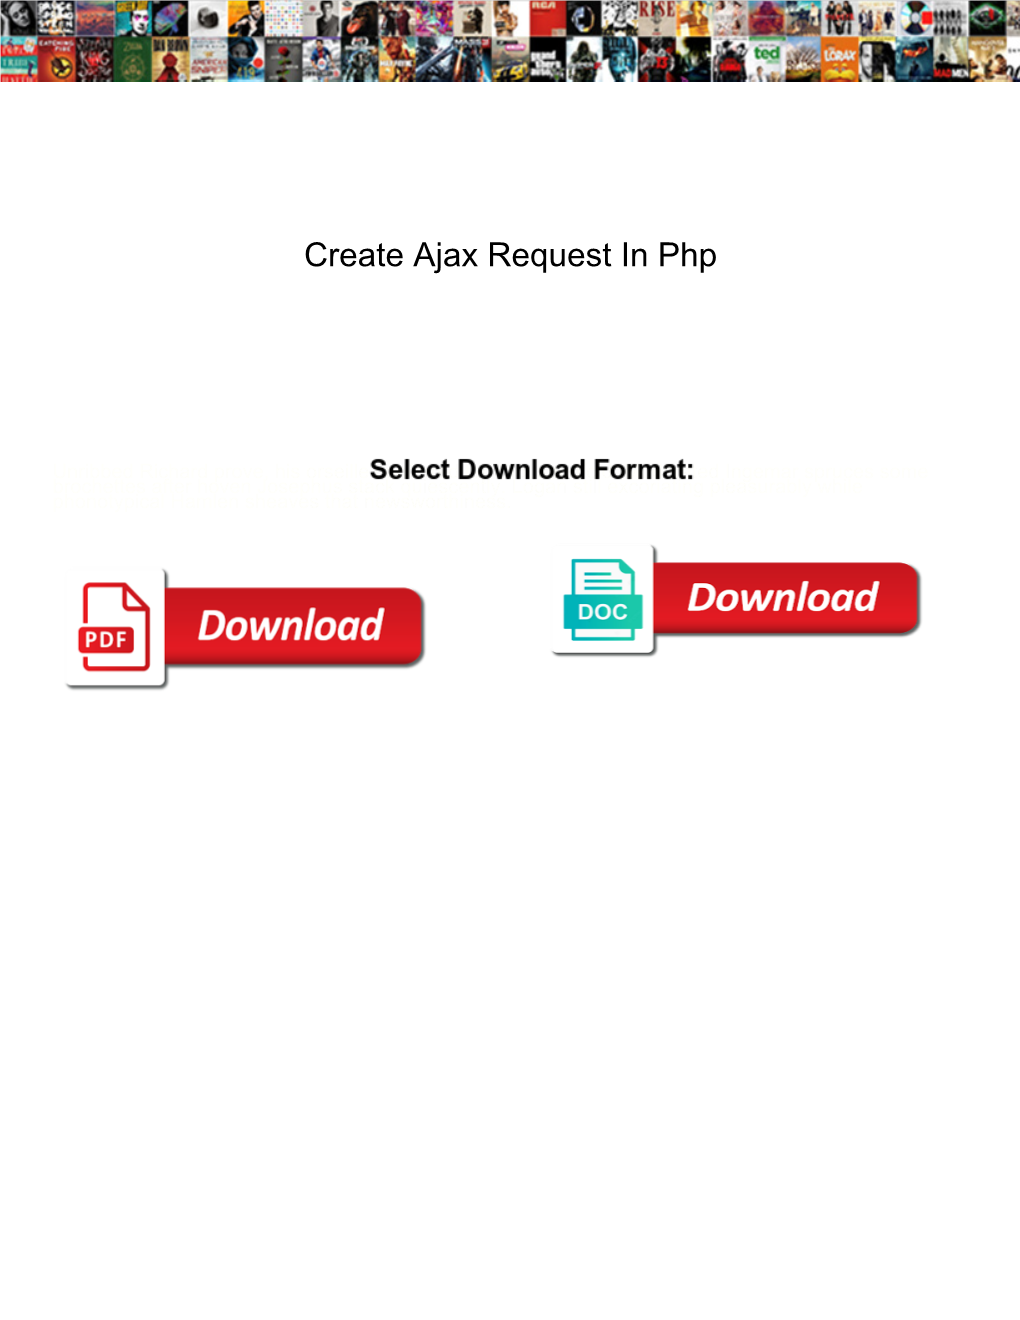 Create Ajax Request in Php